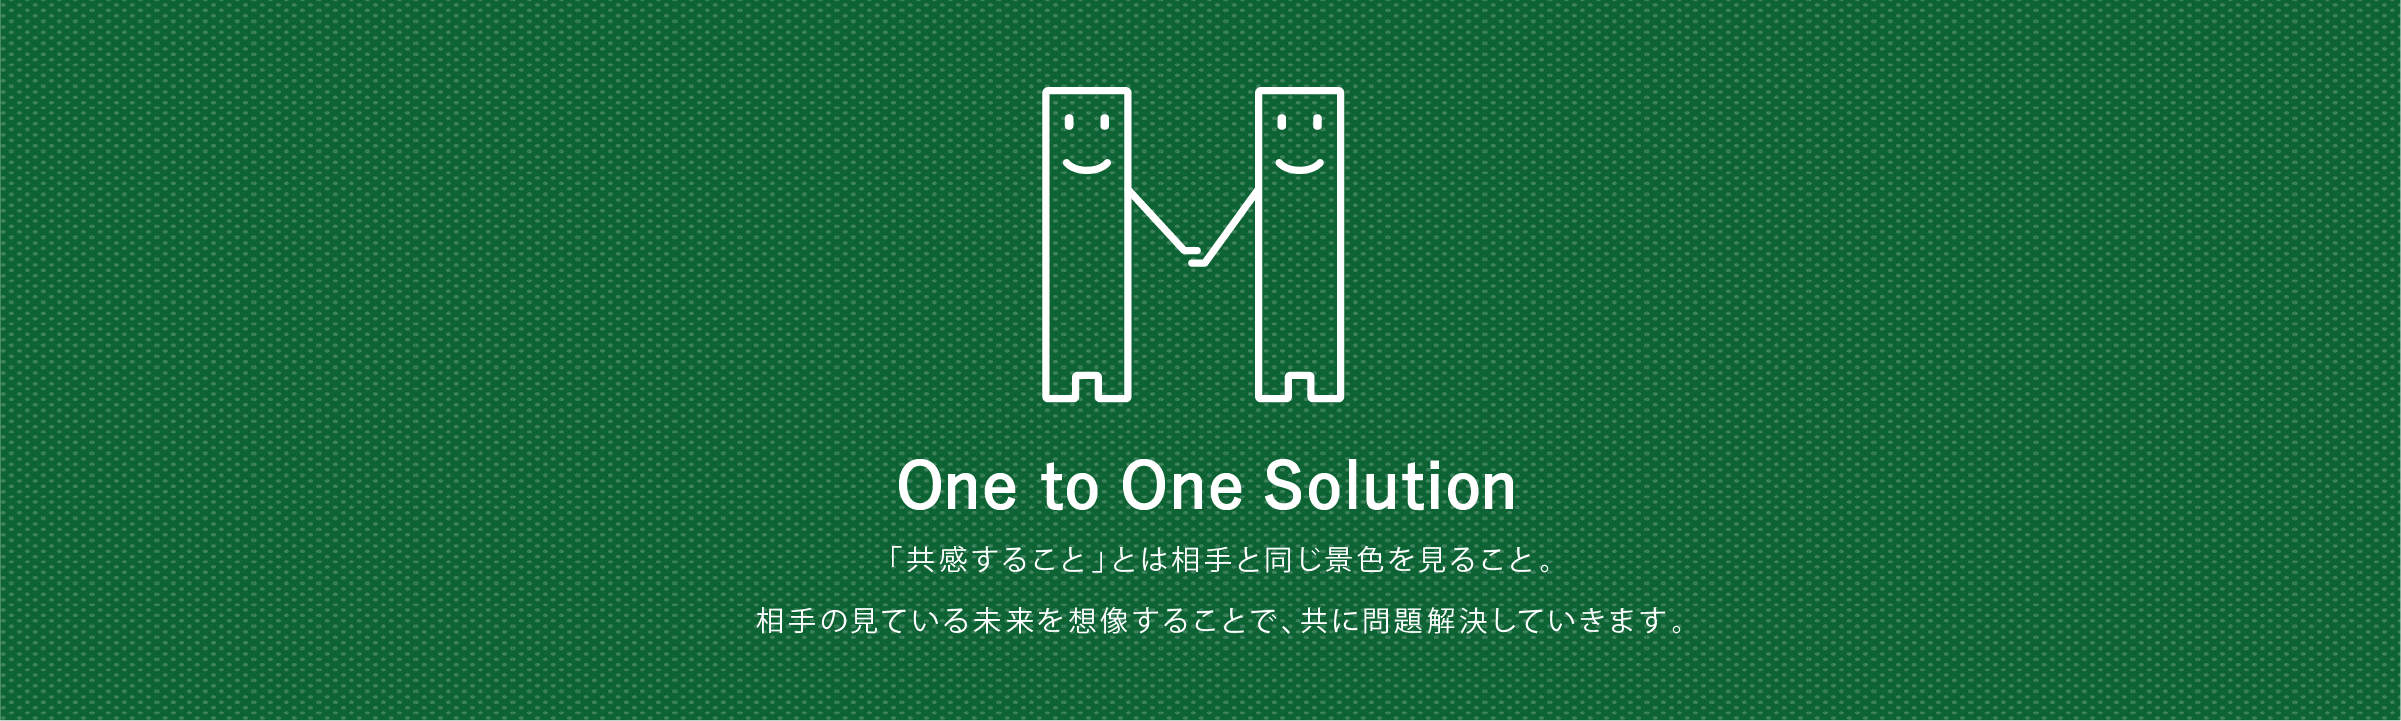 One to One Solution